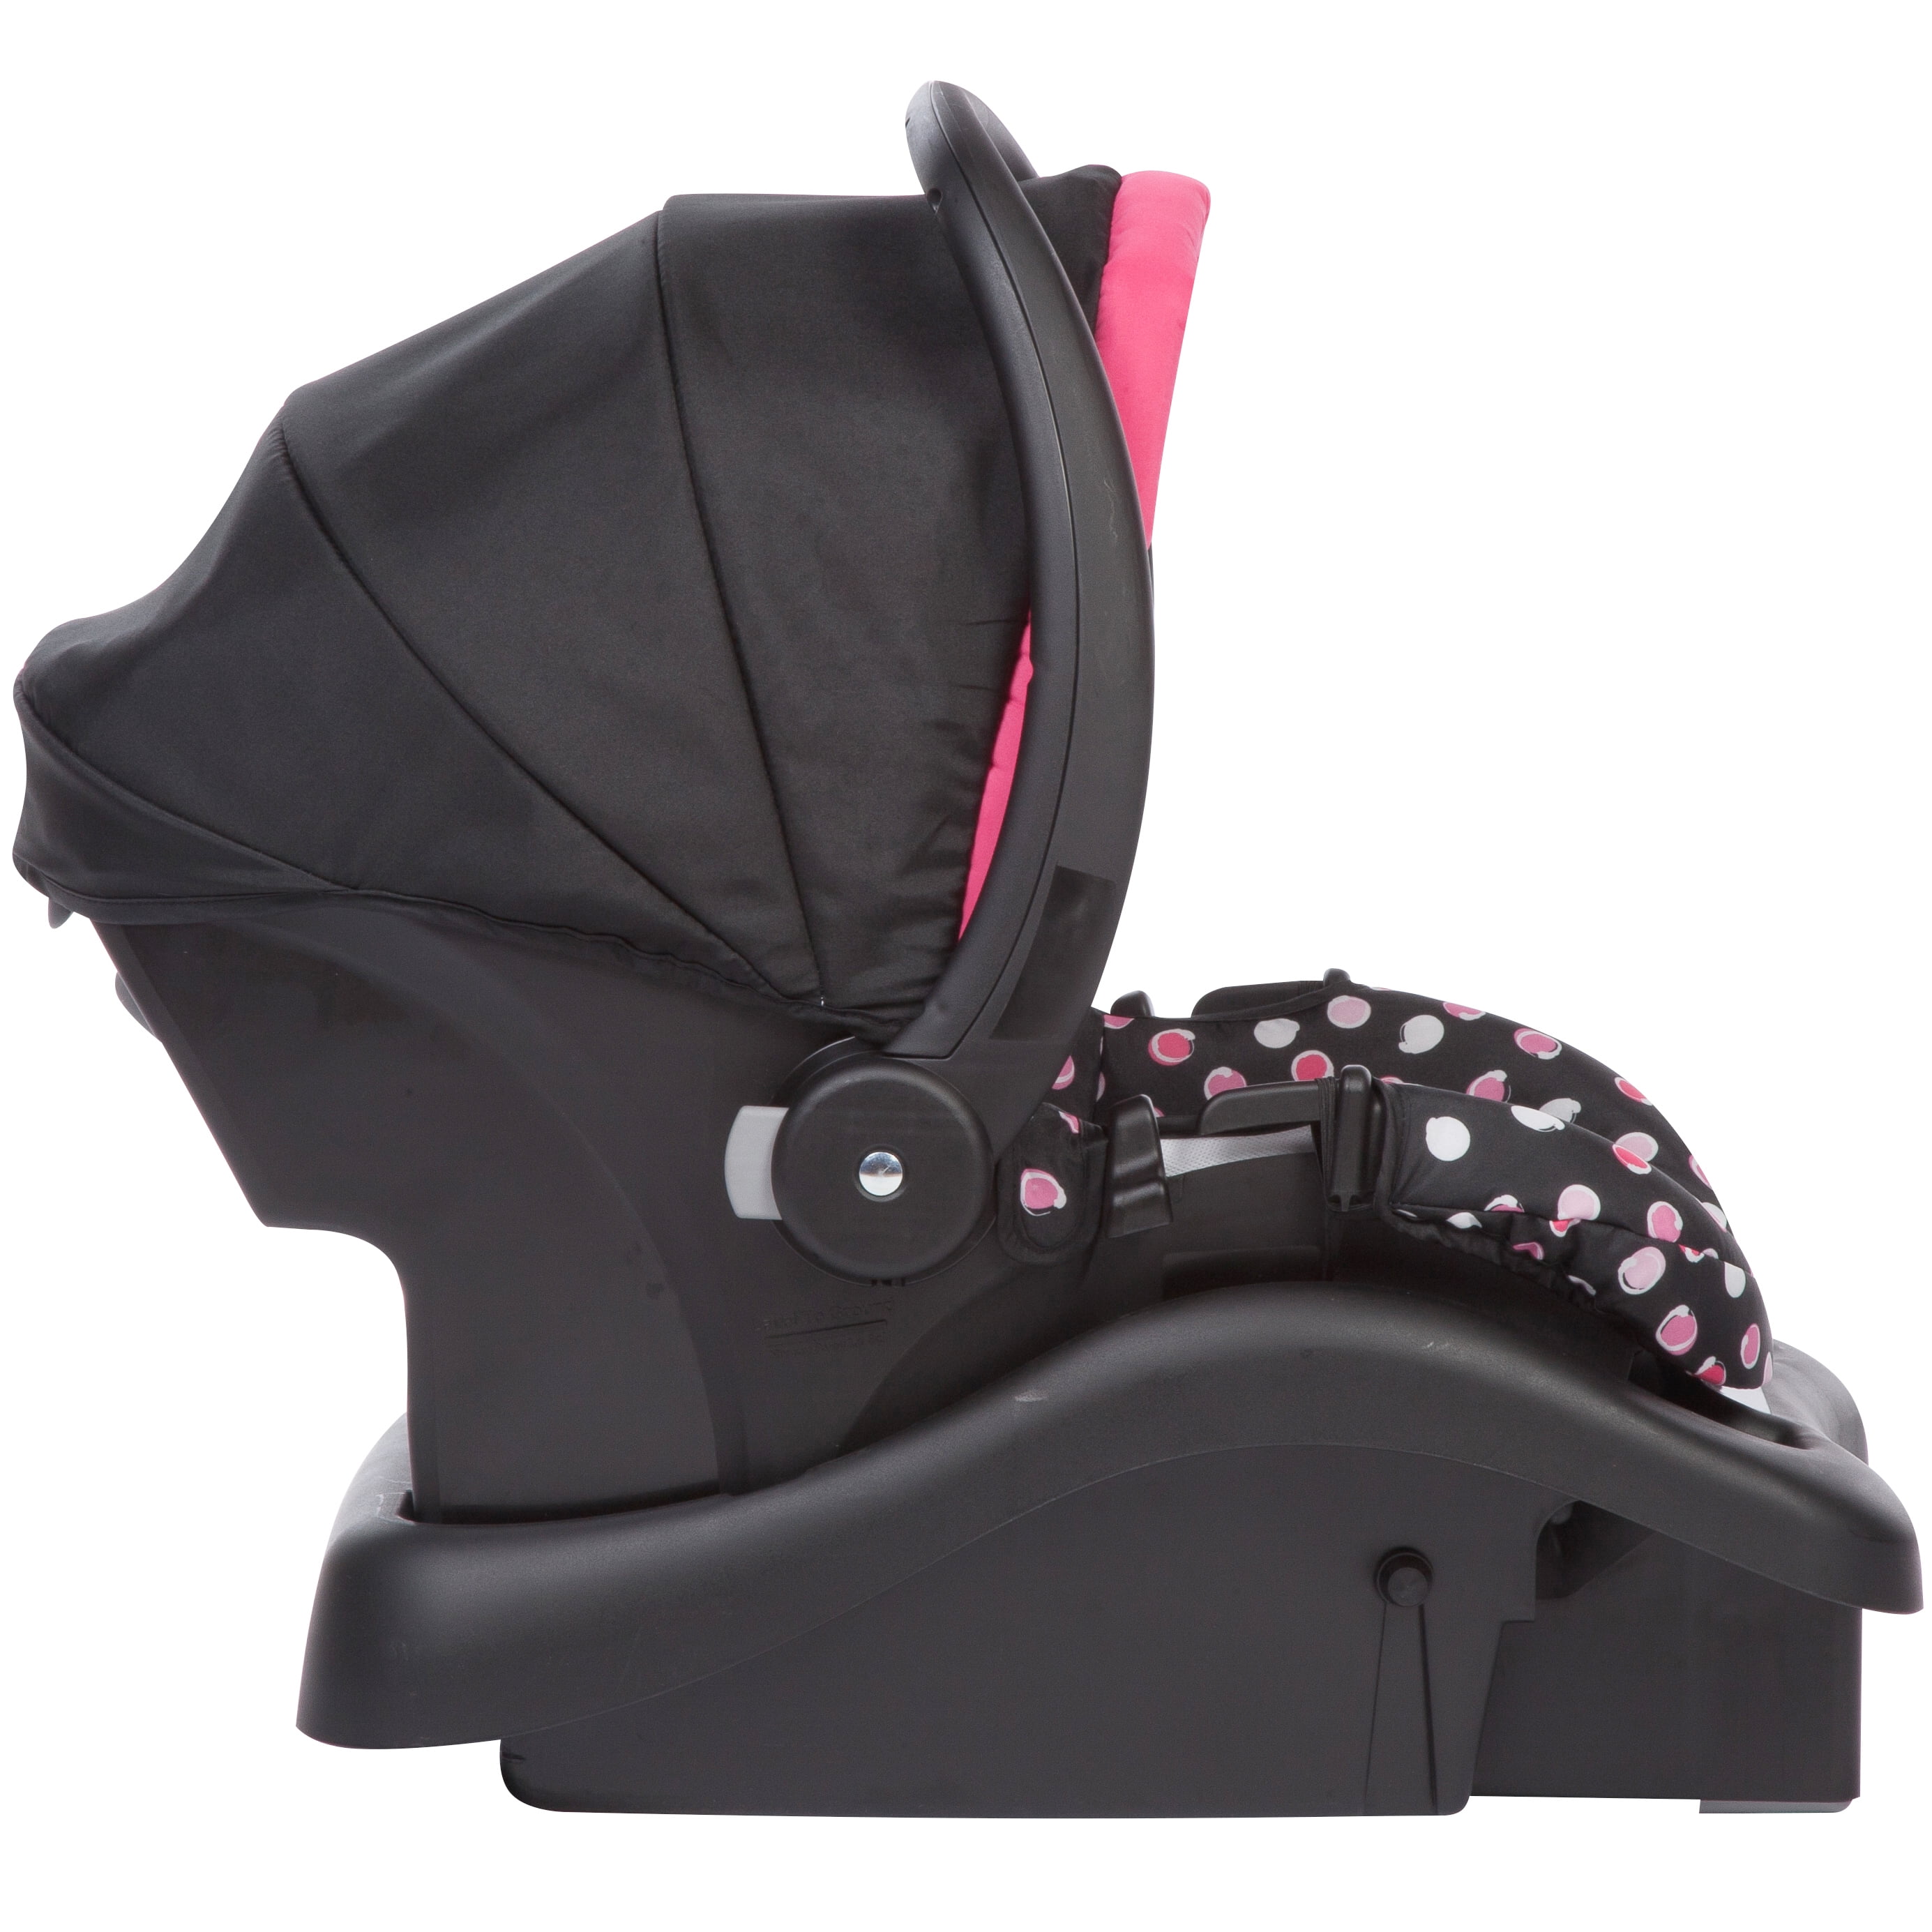 minnie mouse smooth ride travel system